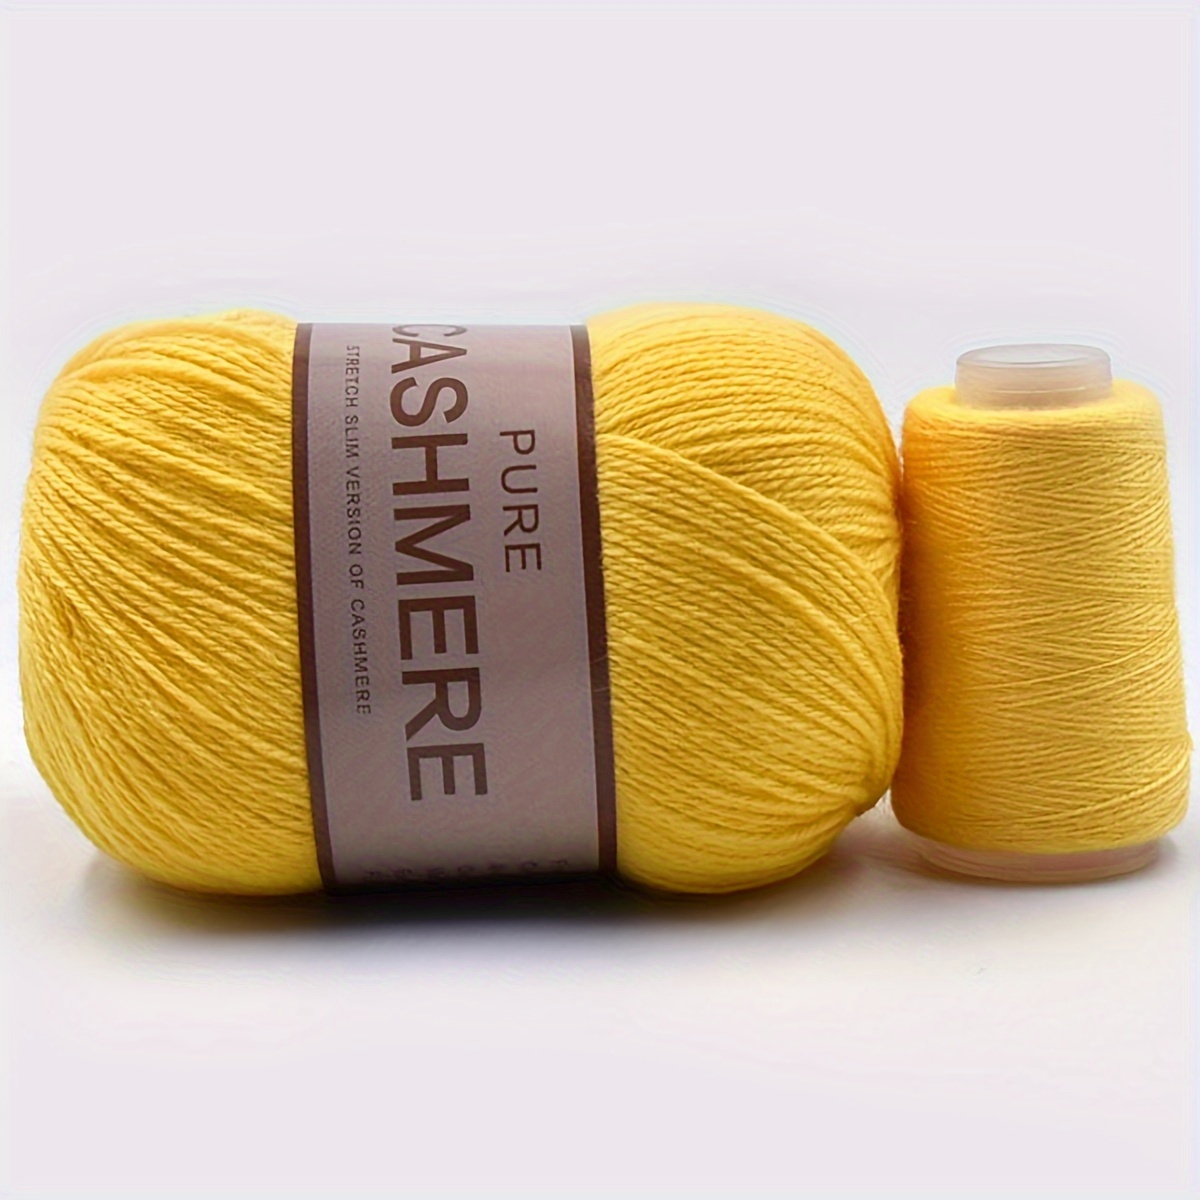 mylb 1Pc=50g Mongolian Cashmere Hand-knitted Cashmere Yarn Wool Cashmere  Yarn DIY Weave Thread For Scarves Clothes Yarn